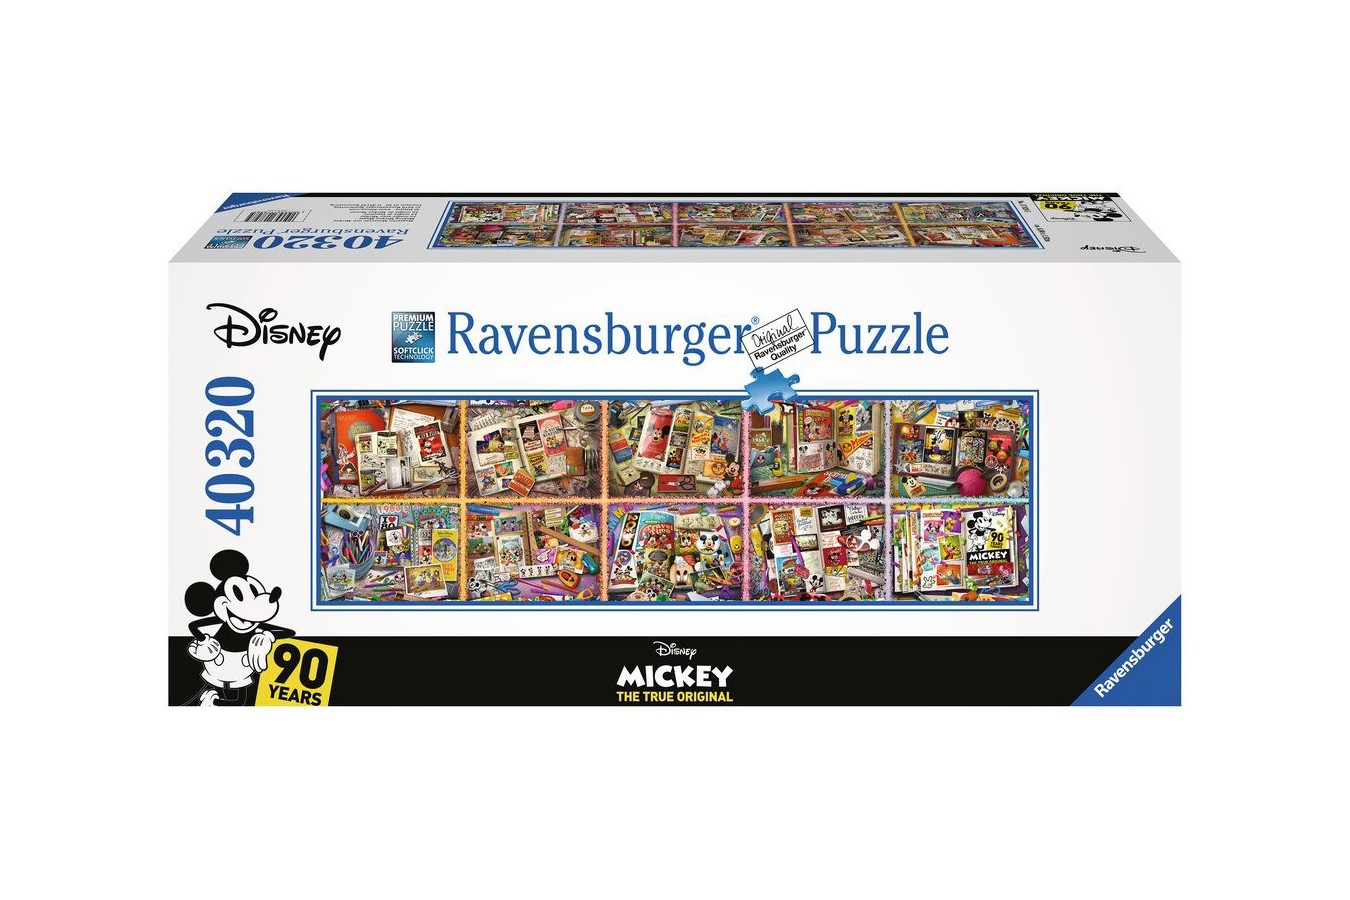 Puzzle Ravensburger - Disney Mickey - 90 Years, 40320 piese (17828)